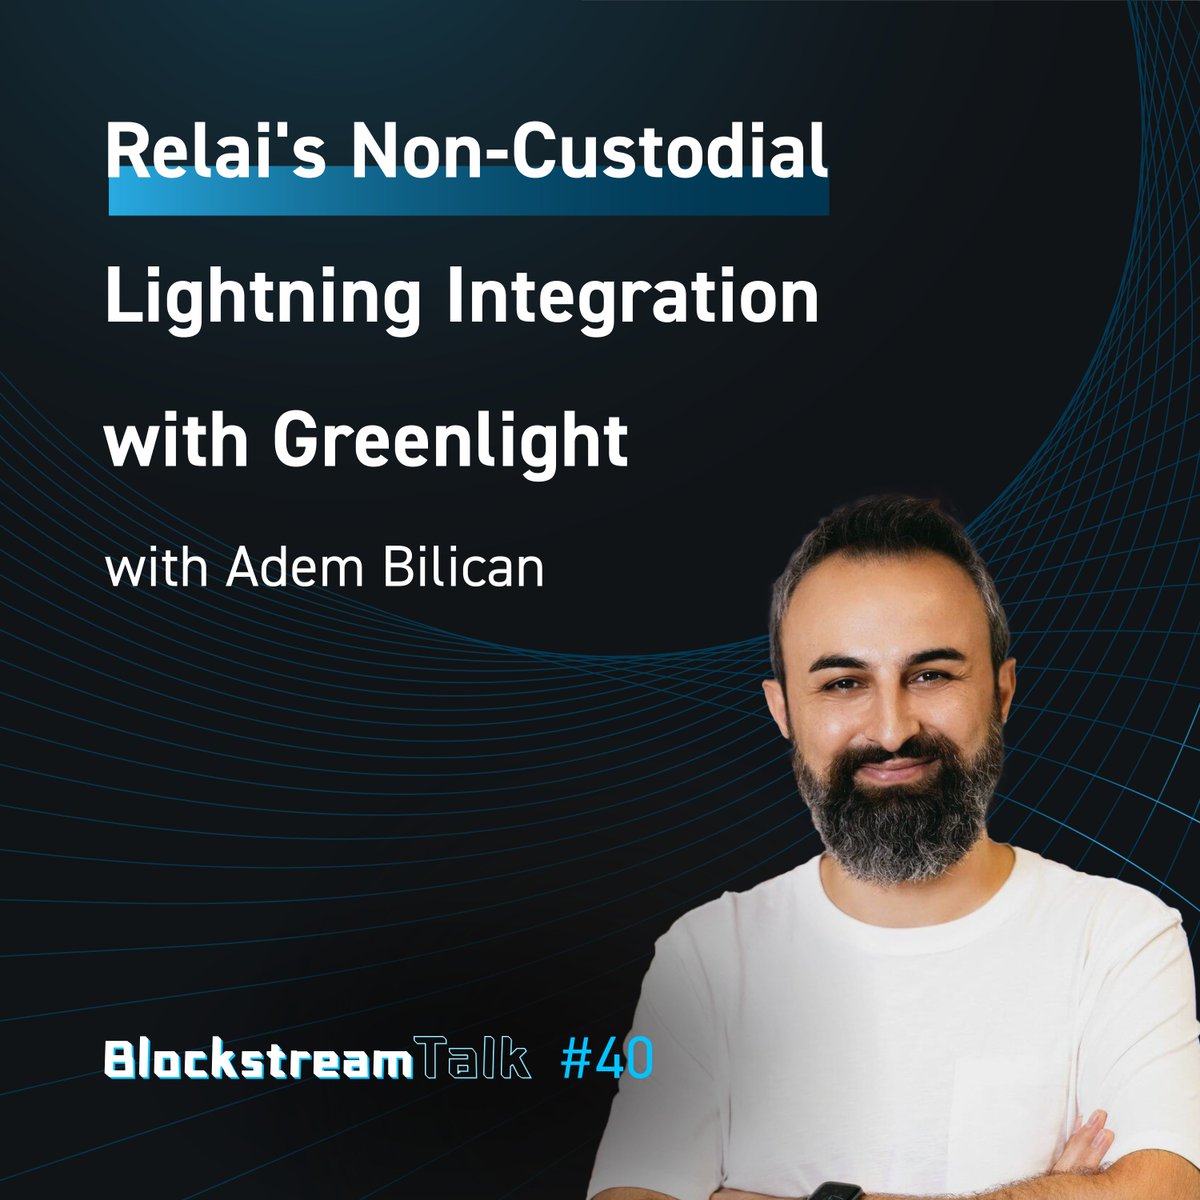 Episode #40 of @BlockstreamTalk with @relai_app CTO @_adembilican_ is out now! Tune in as host @KnutsonJesse discusses the integration of non-custodial Lightning for over 100K European customers utilzing @BlksGreenlight. 🎧 Listen: tinyurl.com/blockstreamtal… 📺 Watch:…